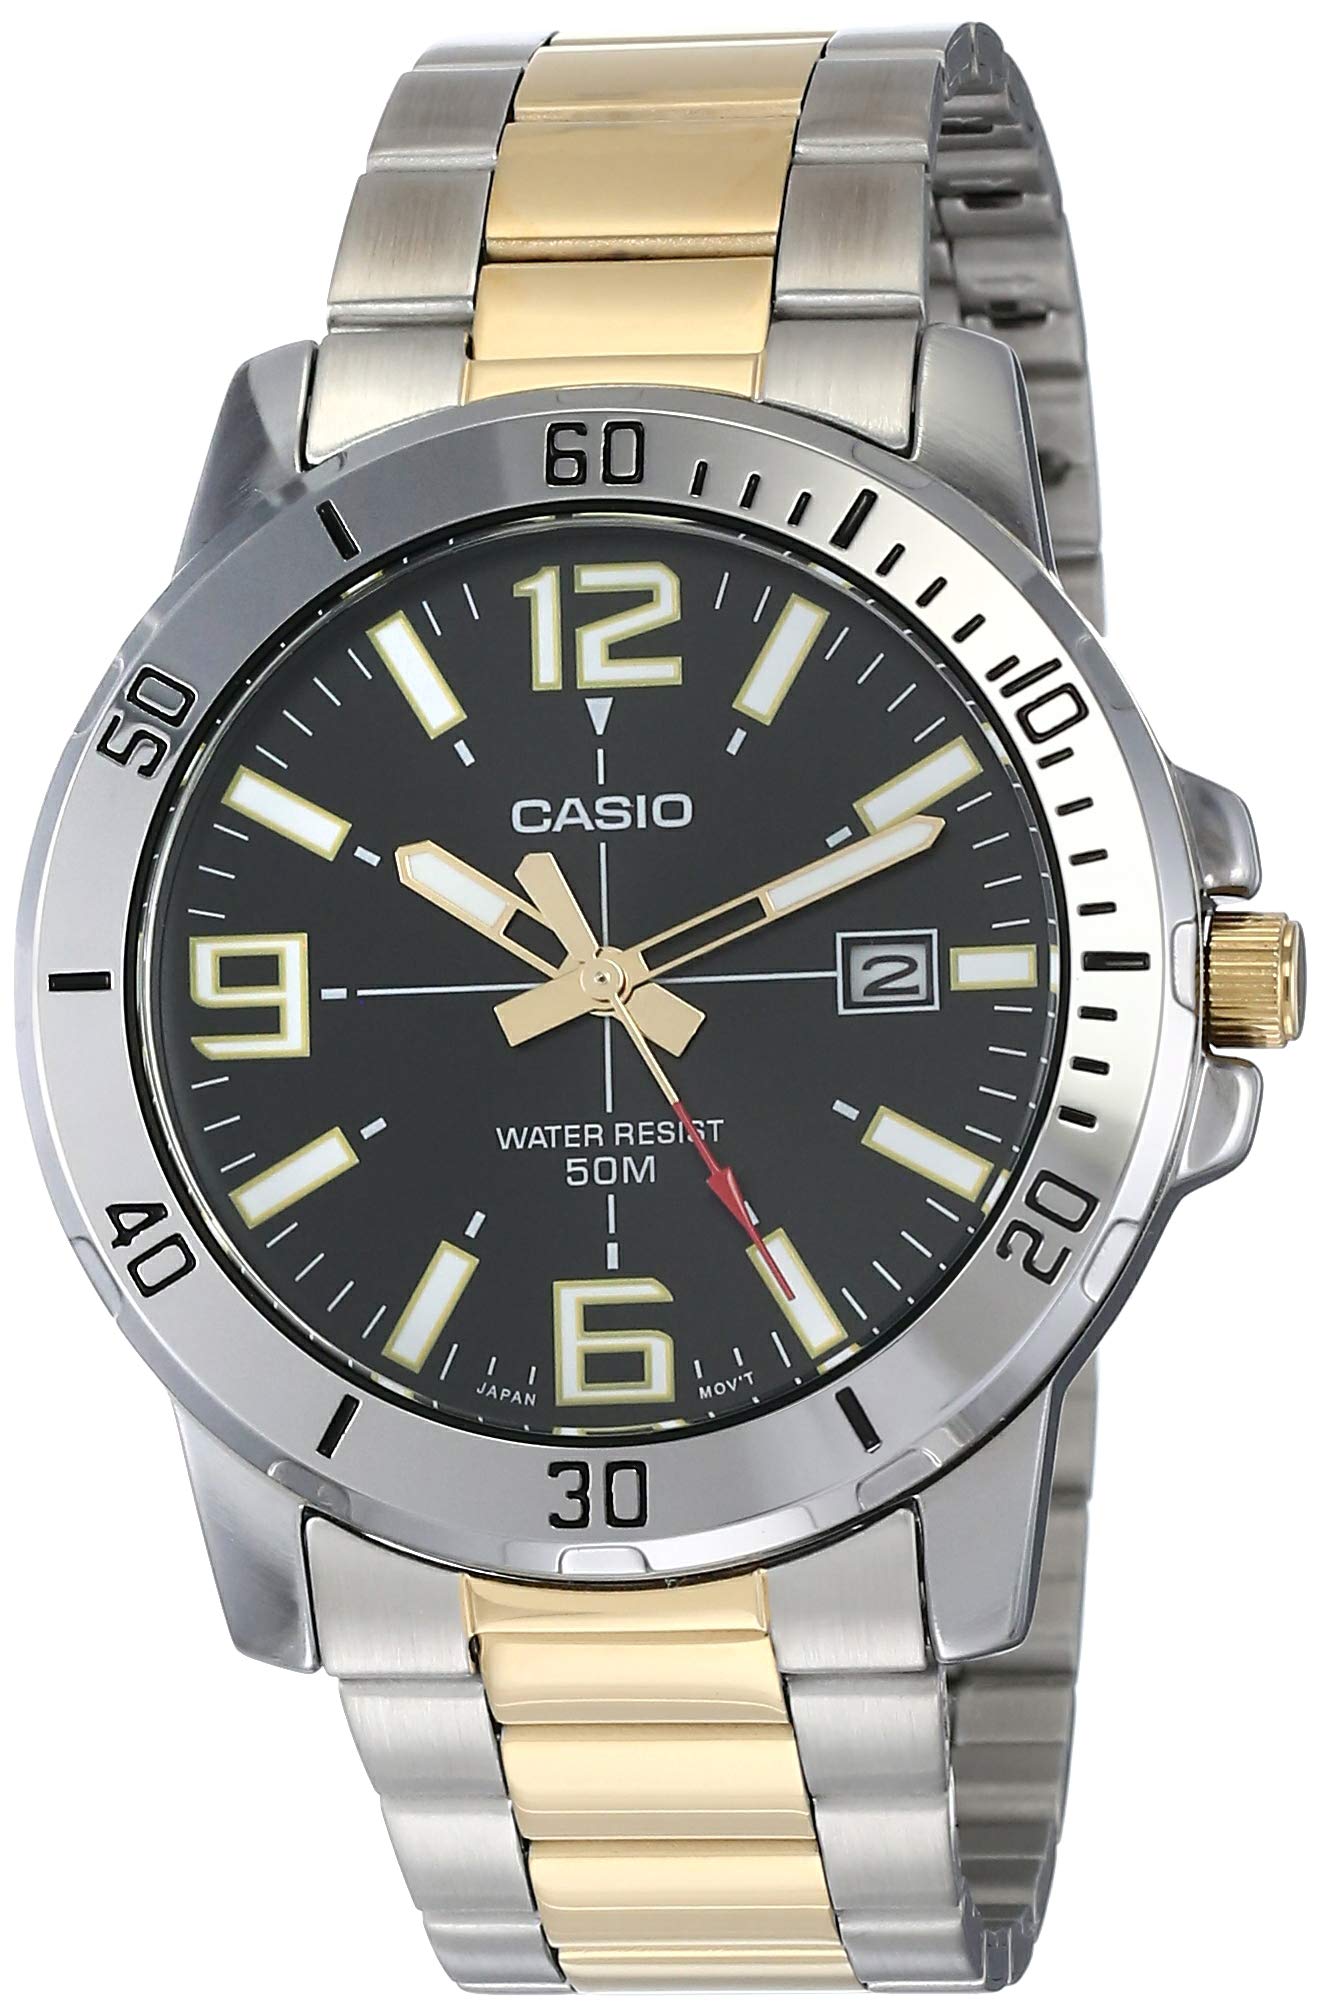 Caso MTP-VD01SG-1BV Men's Two Tone Stainless Steel Black Dial Casual Analog Sporty Watch